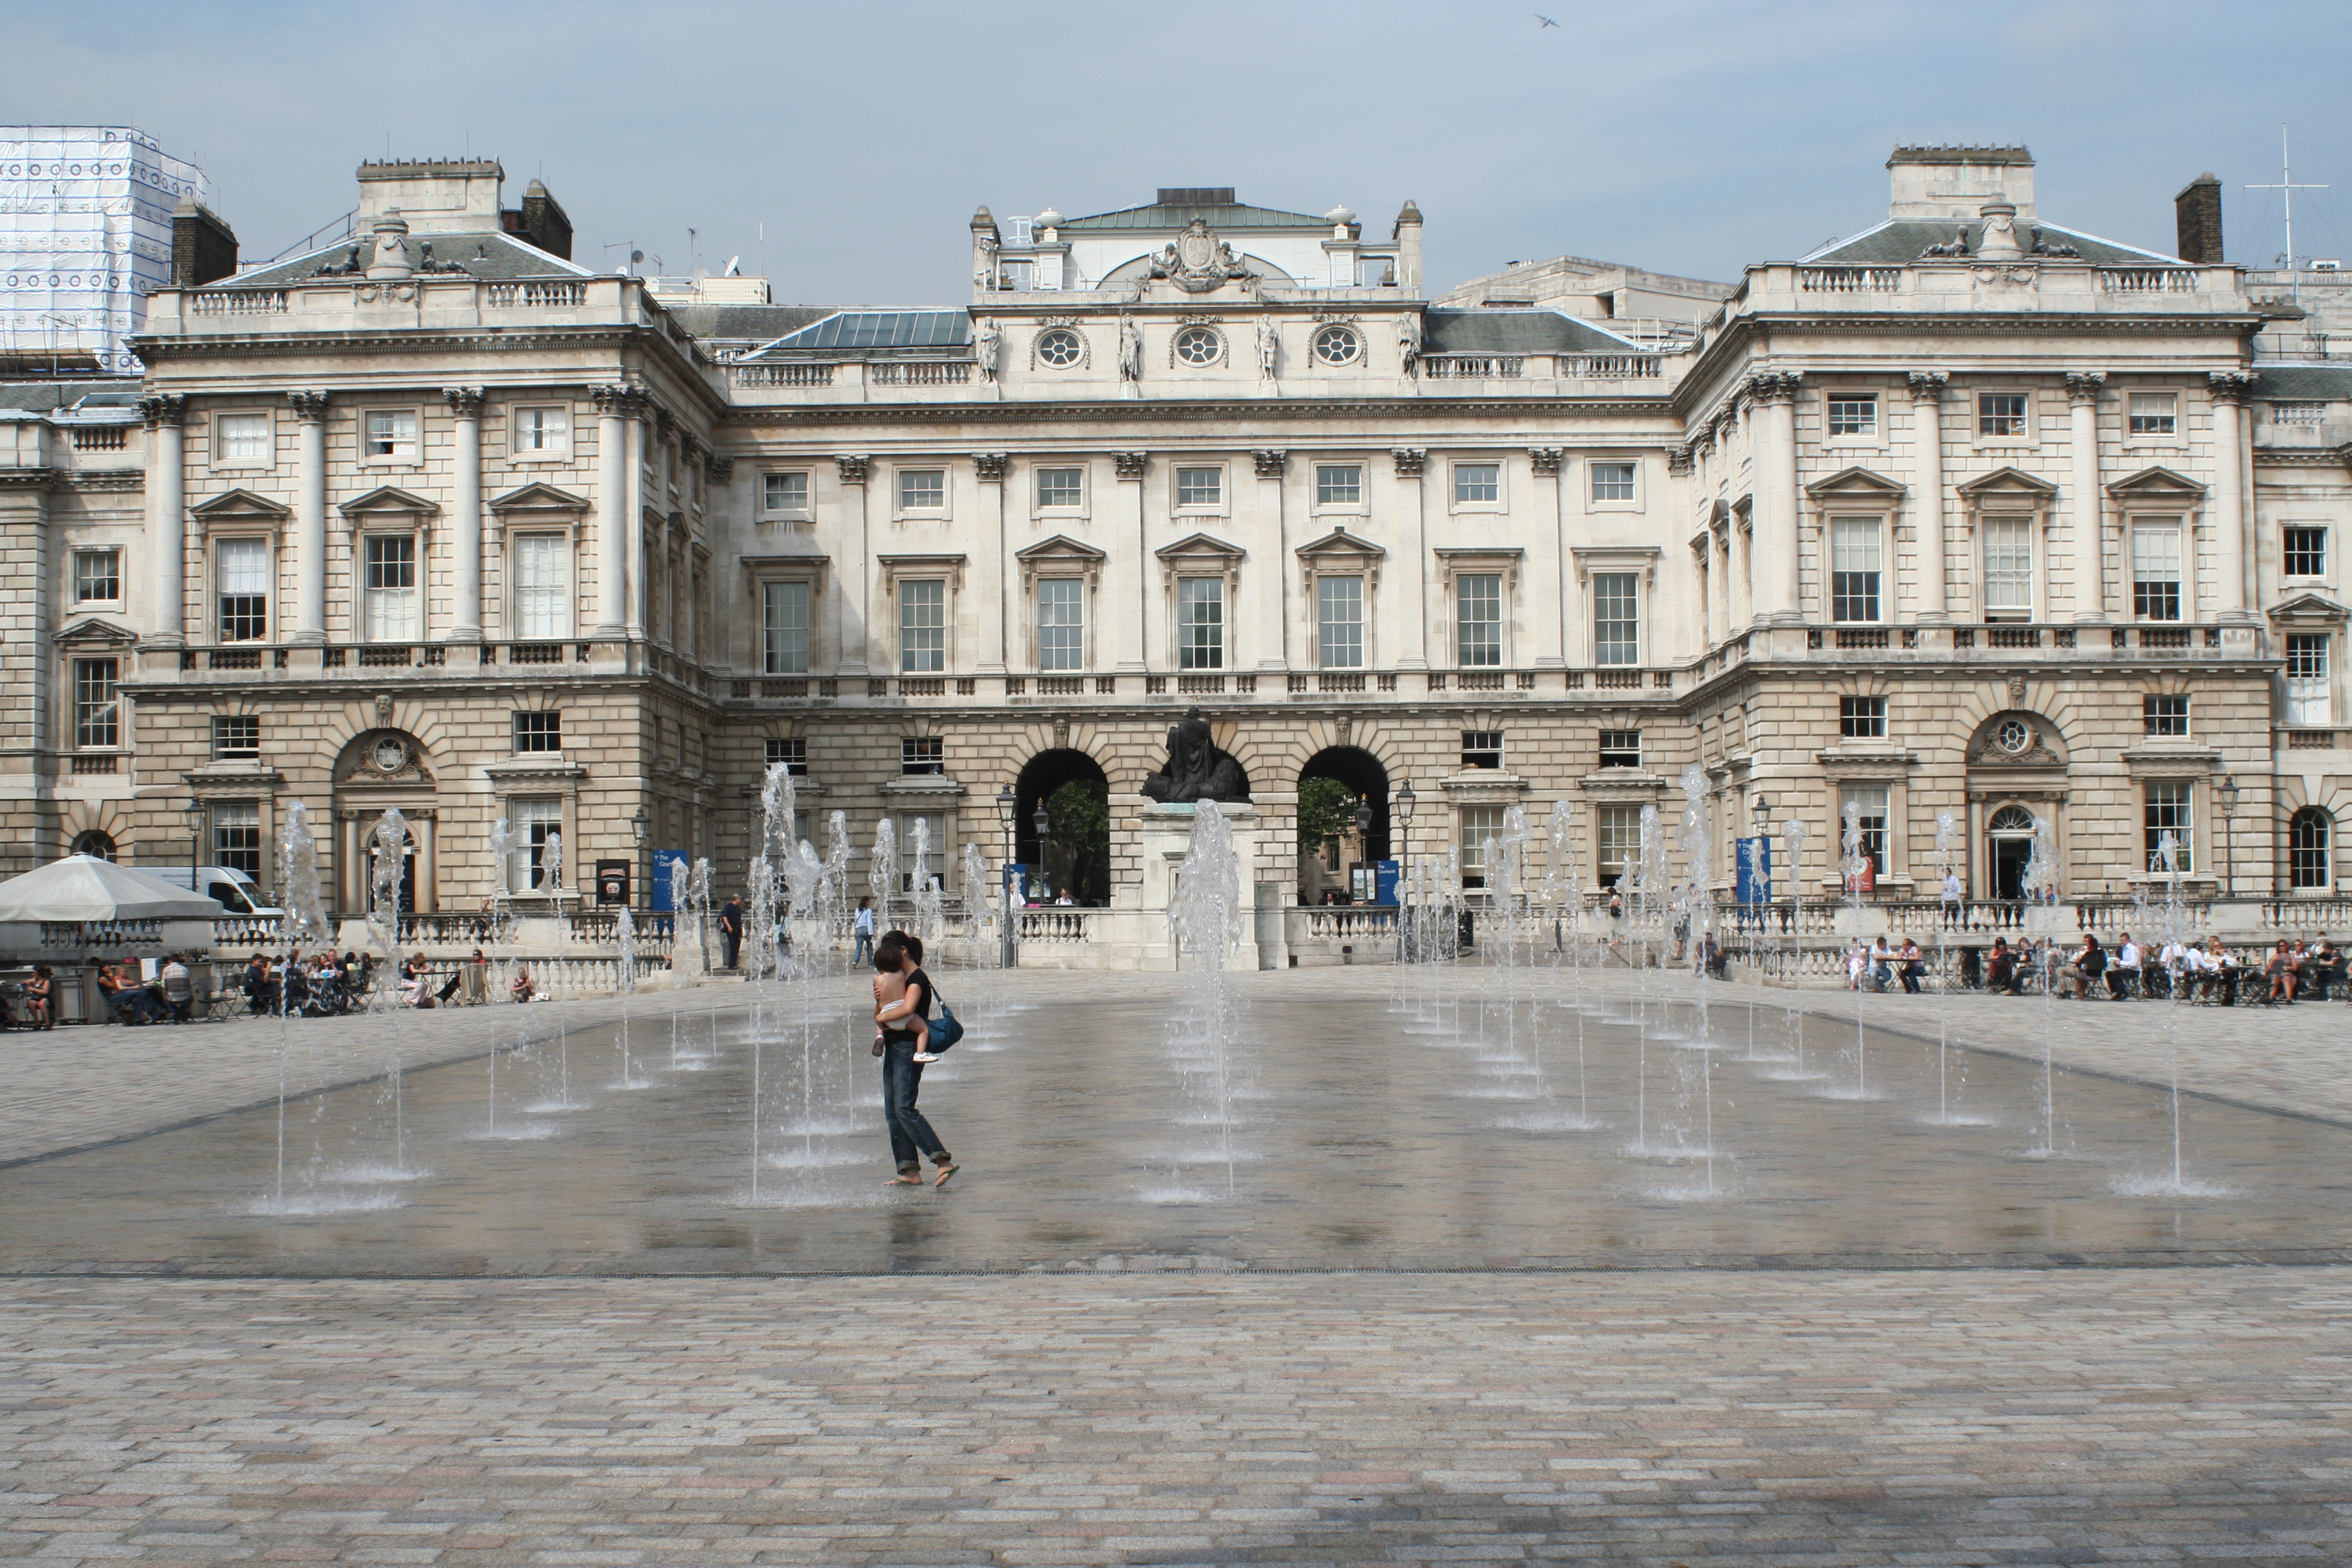 Download this Somerset House Gardenvisit picture